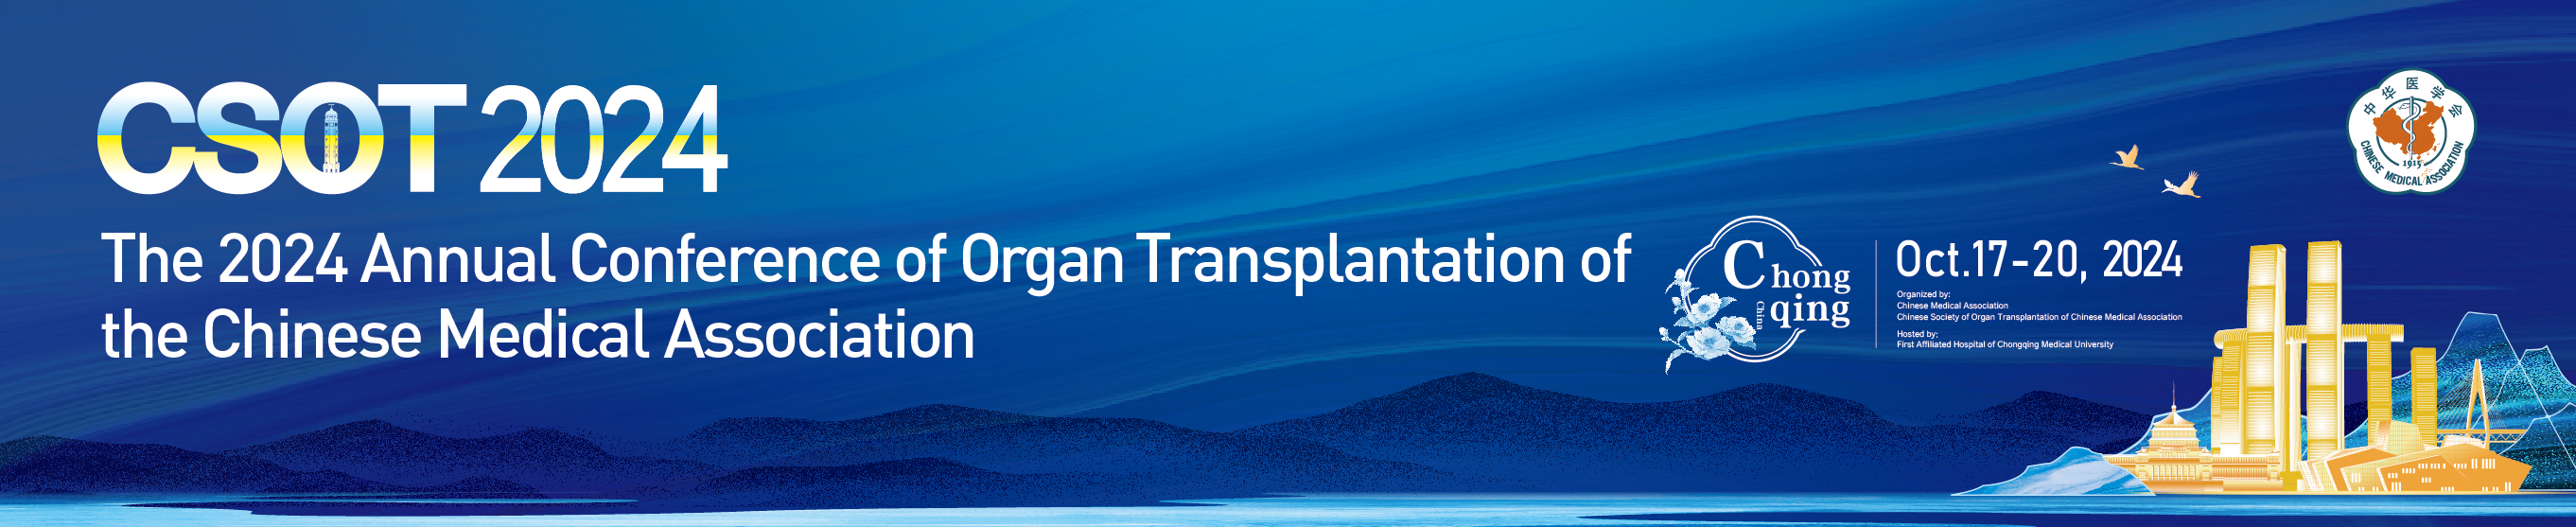 The 2024 Annual Conference of Organ Transplantation of the Chinese Medical Association